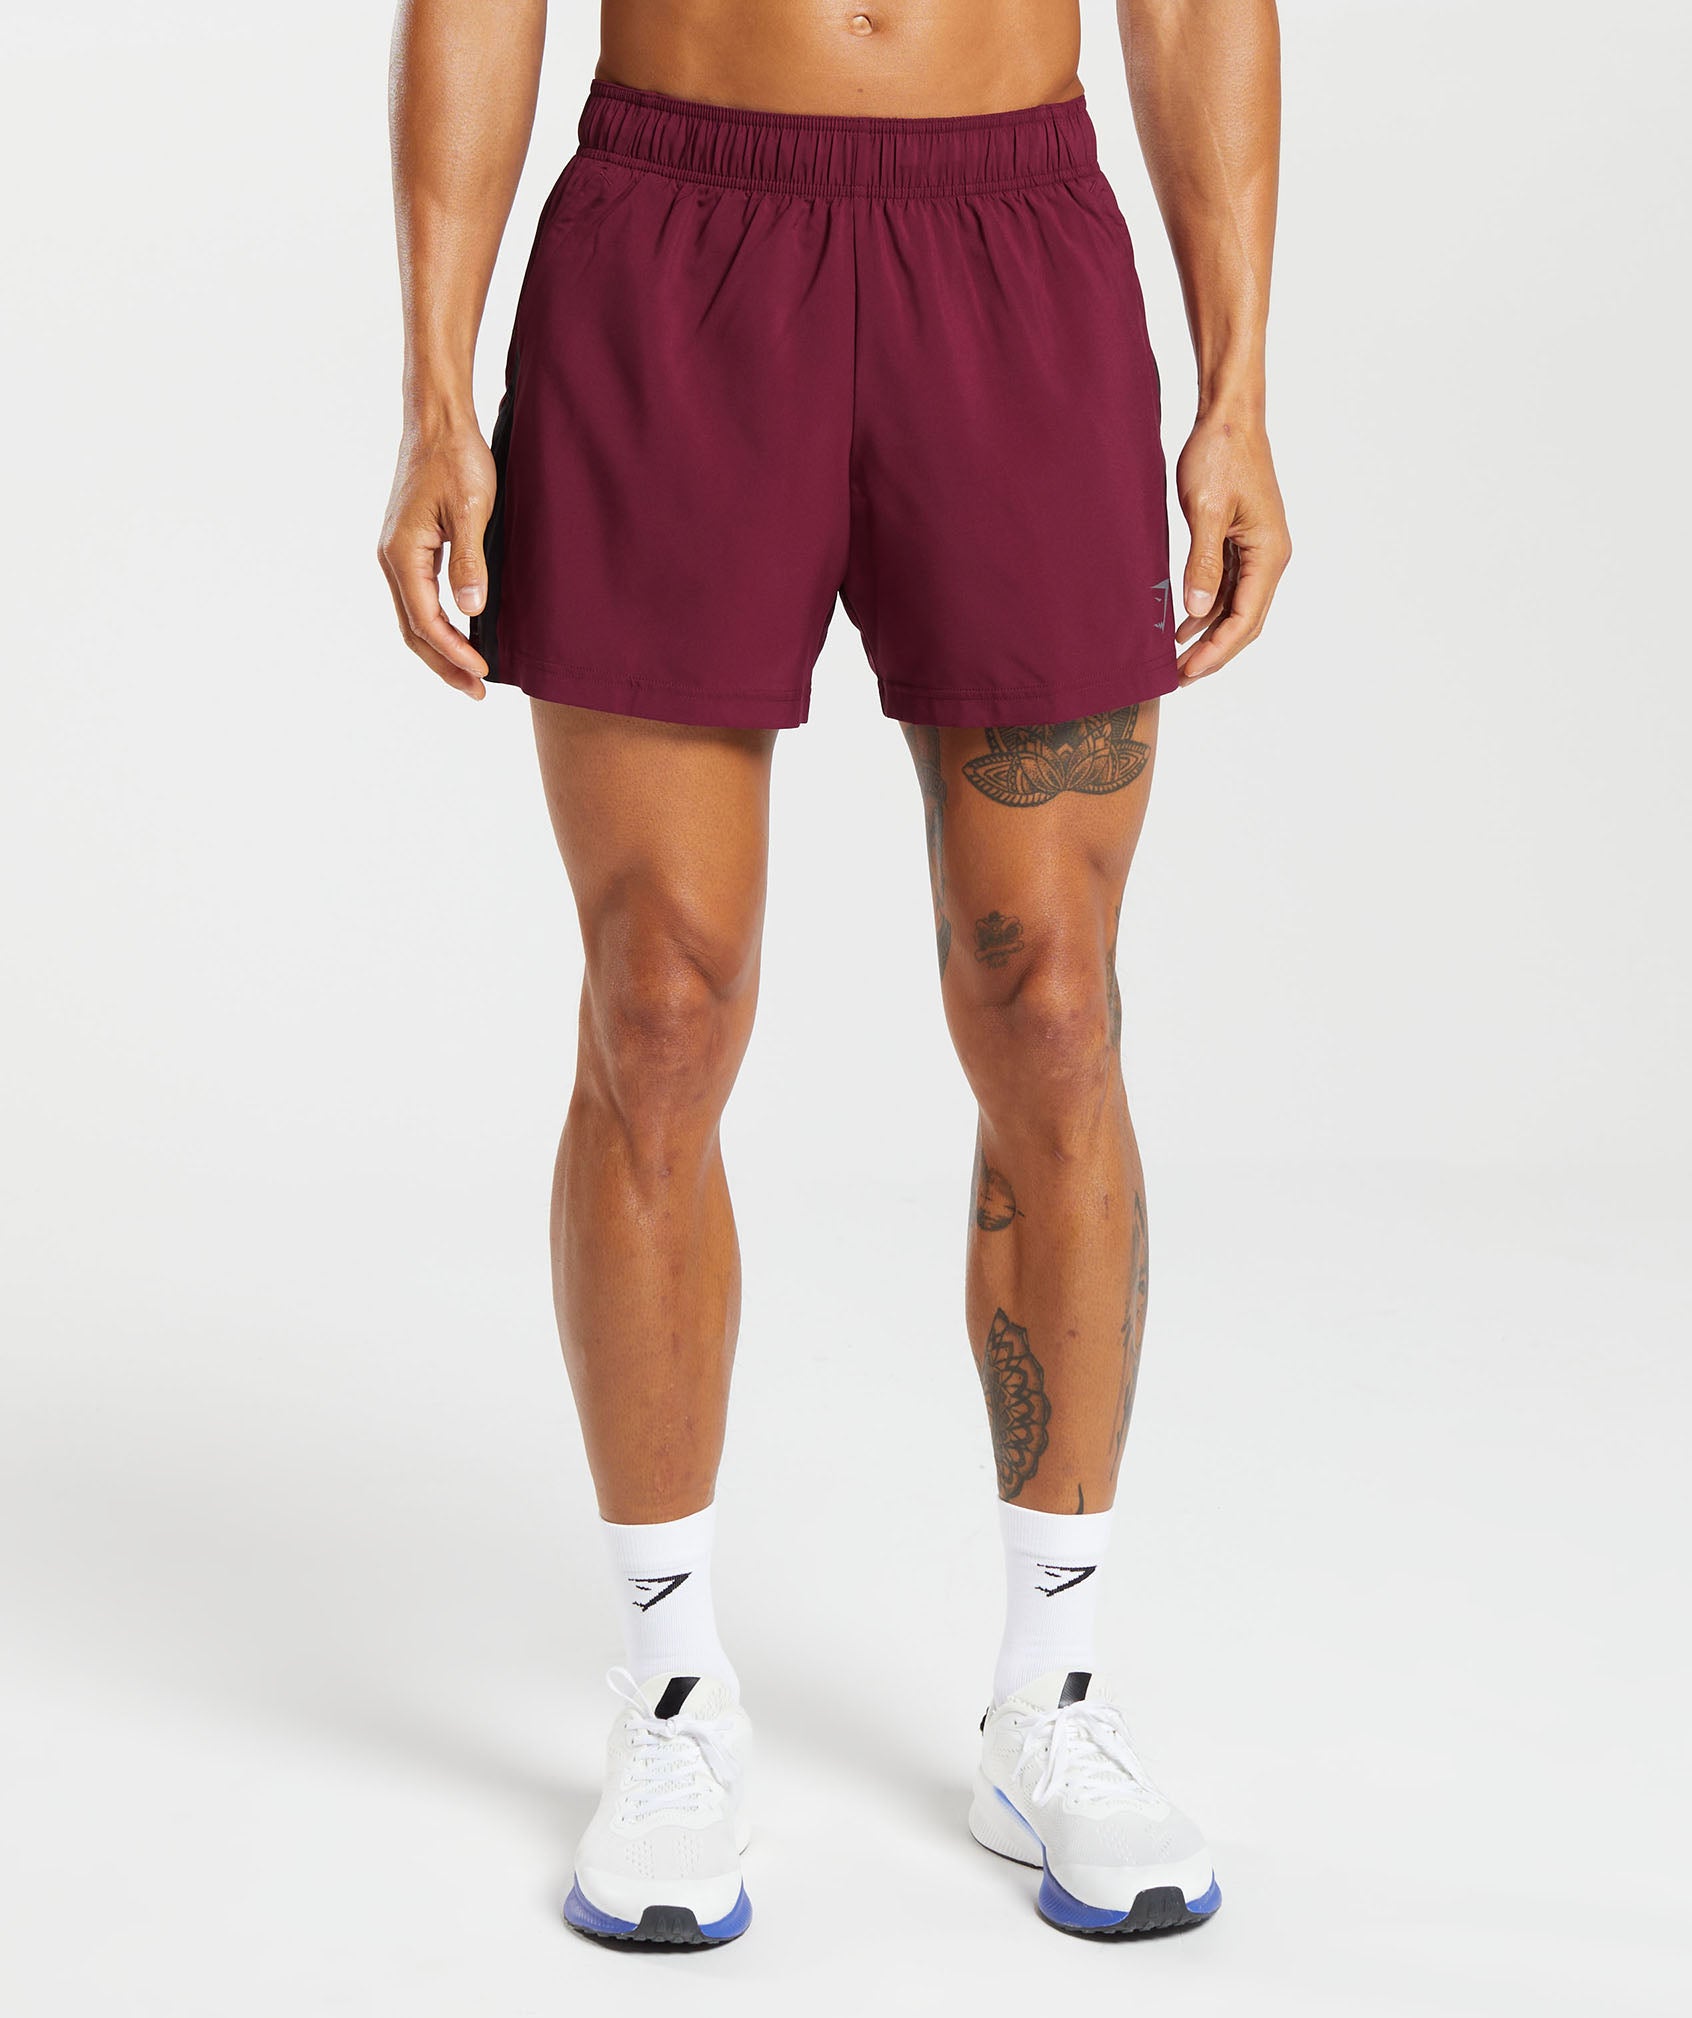 Sport 5" Shorts in Plum Pink/Black - view 1